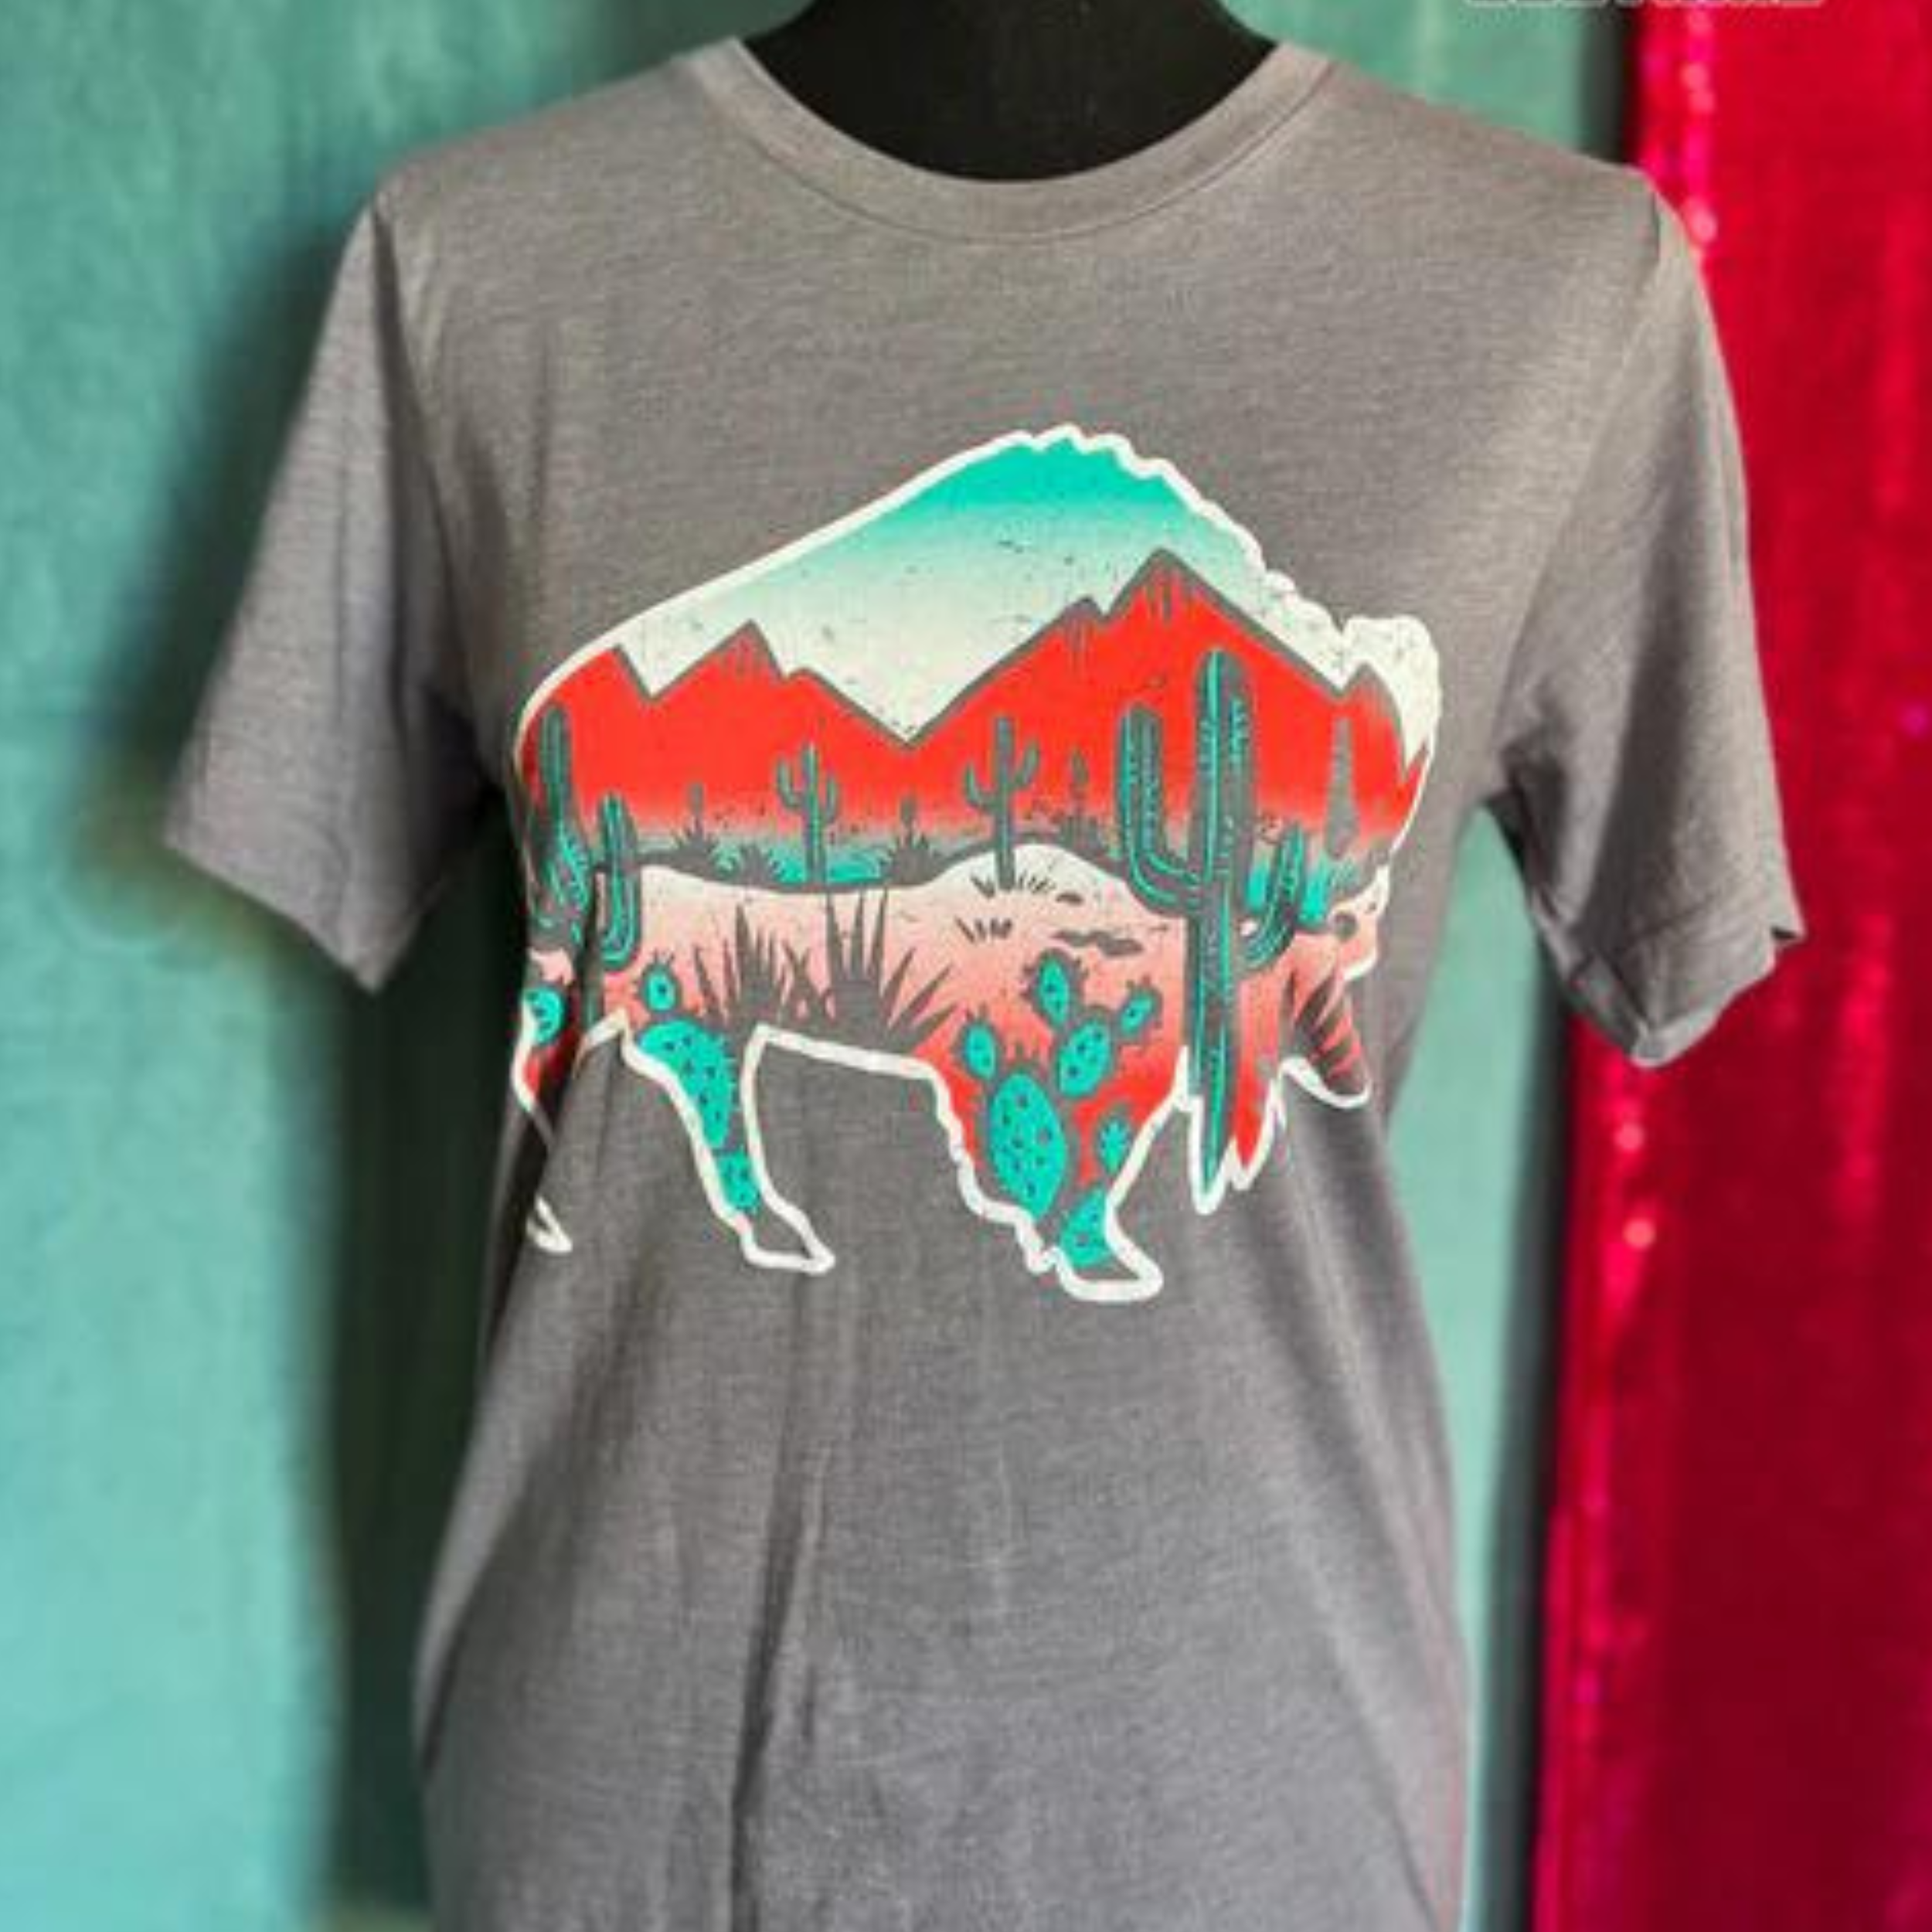 A gray short sleeve tee featuring a graphic of the outline of a bison. On the inside of the bison is a red, pink, white, and blue desert with green cacti scattered throughout and red mountains. Item is pictured on a blue and pink background.